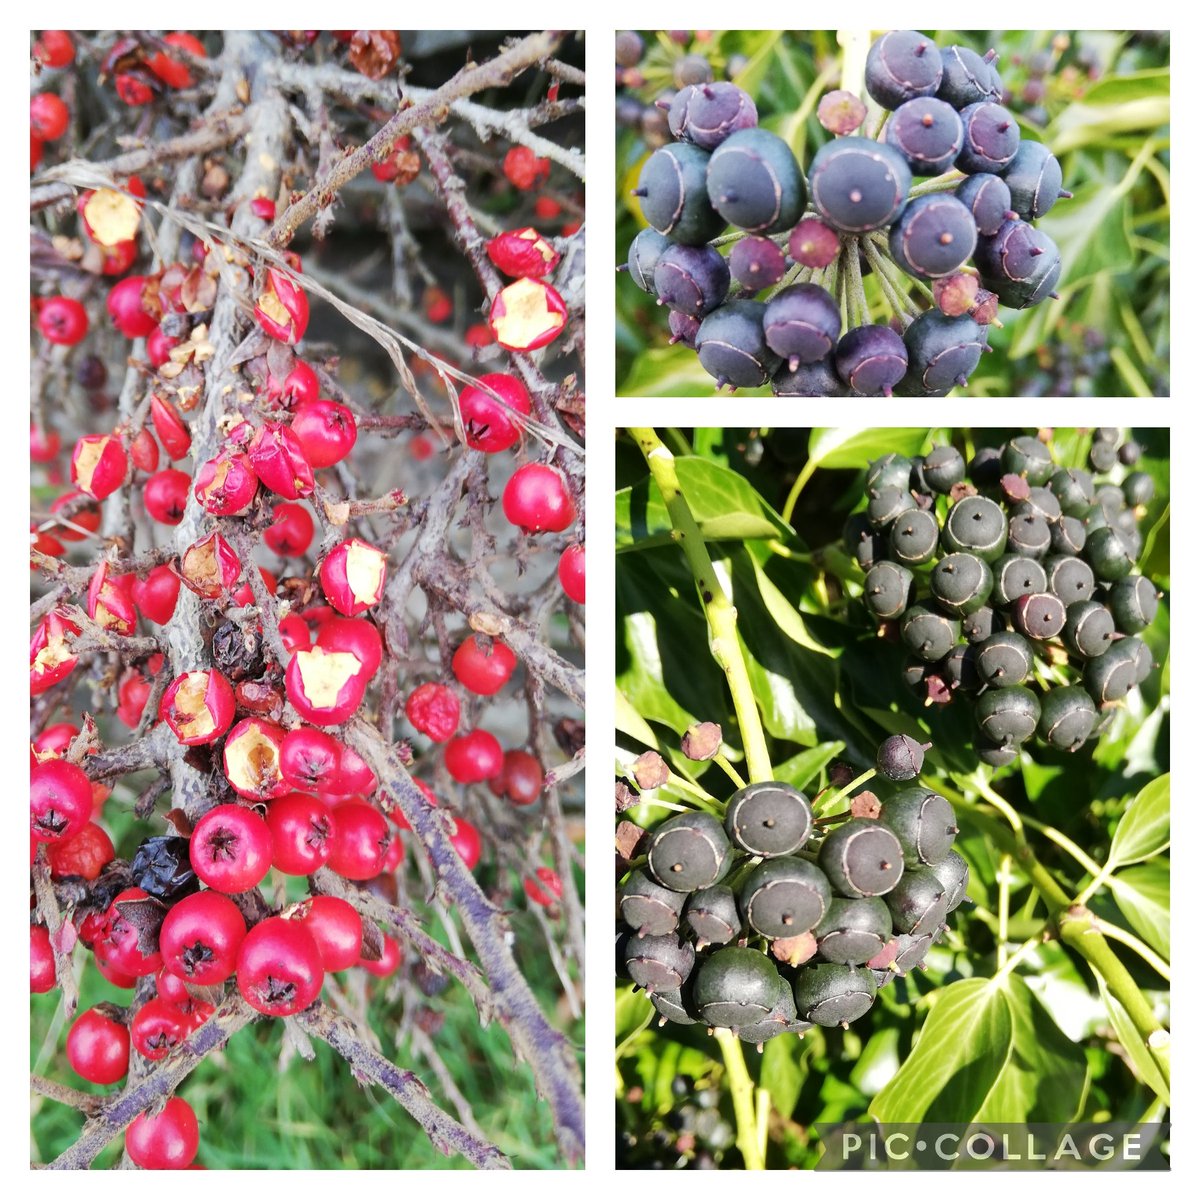 I've been noticing the colour changes in ivy berries as they mature. Top pic from early January, lower ten days later. . . but what I'd really like to know is who's been eating the Cotoneaster berries? My money is on the🐀. . . #GardensHour.